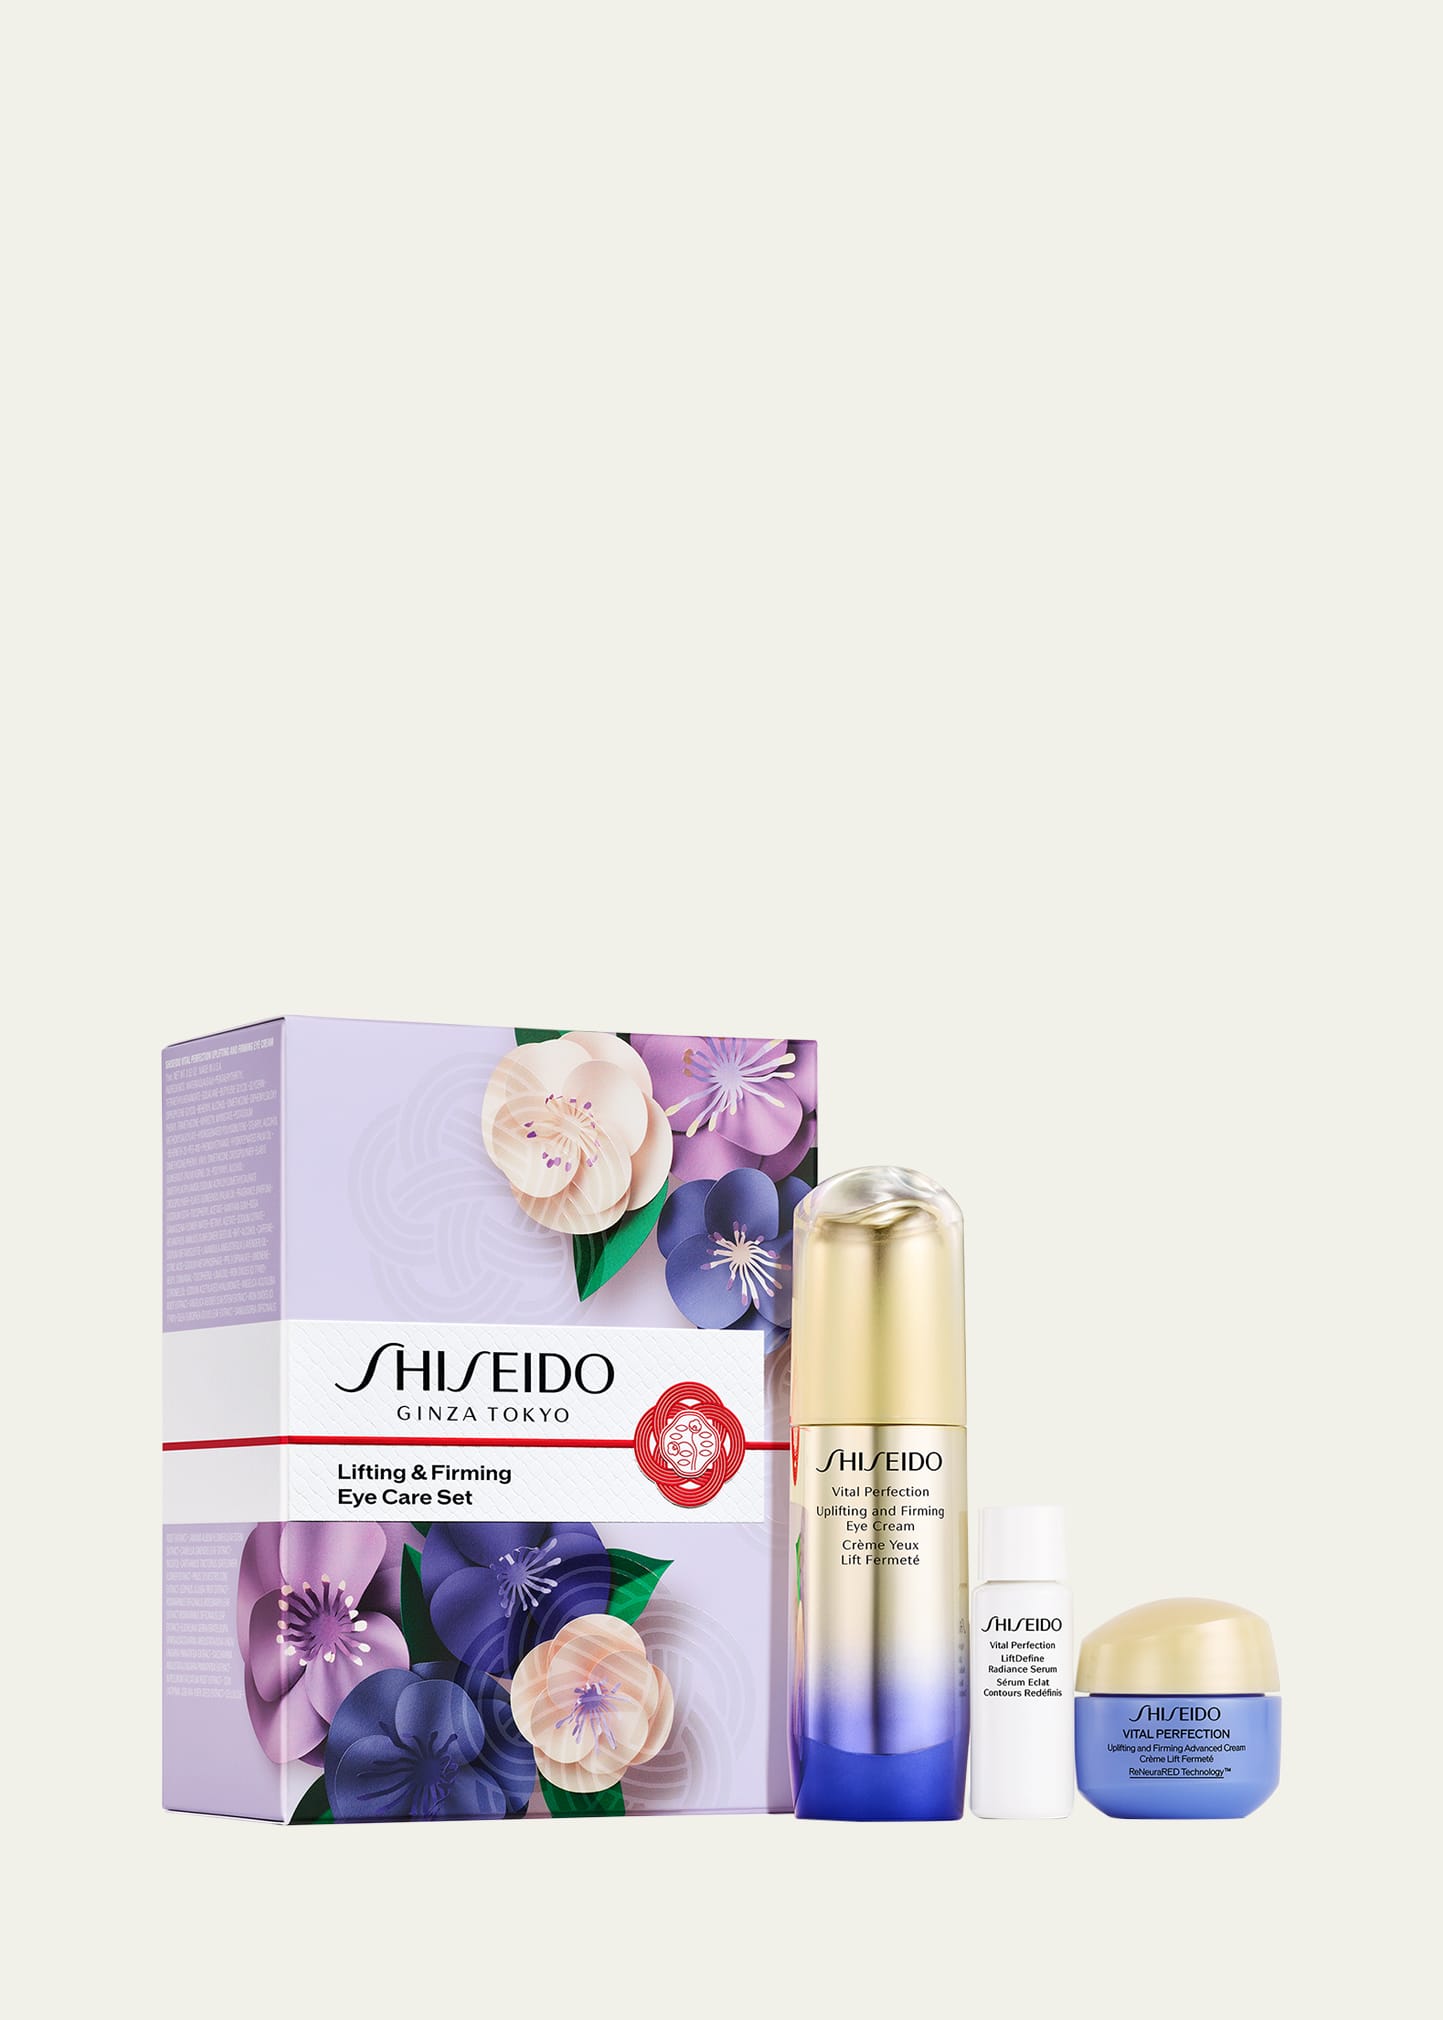 Limited Edition Lifting & Firming Eye Care Set ($152 Value)